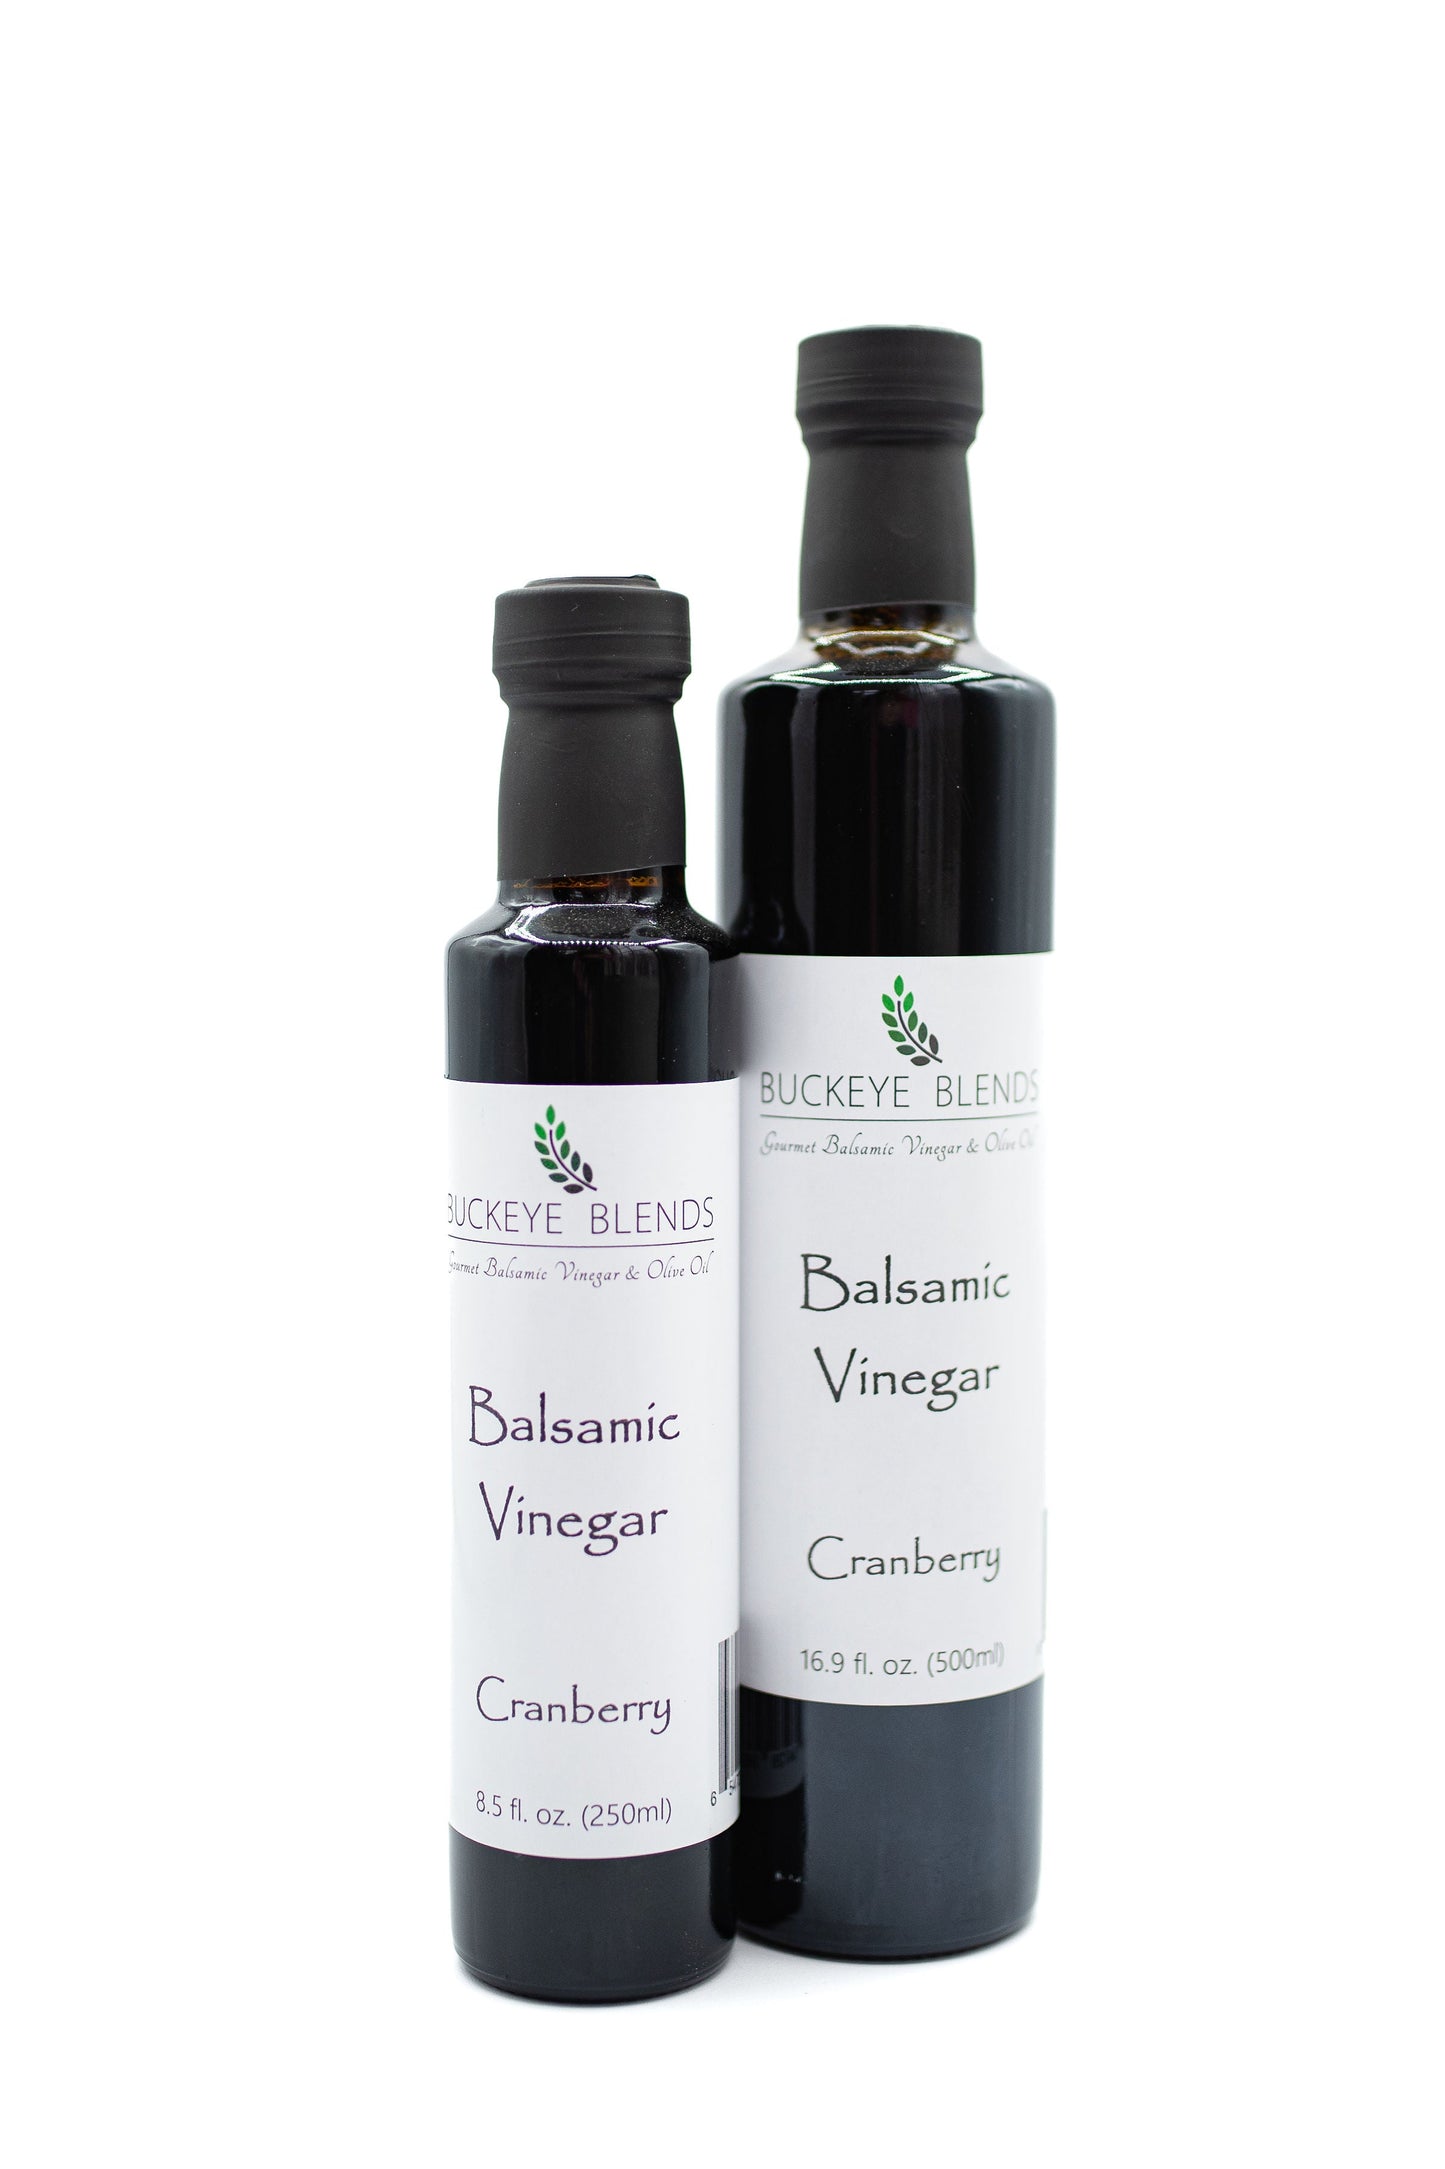 Buckeye Blends Cranberry Balsamic Vinegar is great on salad, fish, chicken, and pork!  It's thick and rich like a balsamic glaze, can be mixed with olive oil, or enjoyed by itself.  Similar to our Cranberry Pear Balsamic Vinegar, it's one of our most popular balsamics.